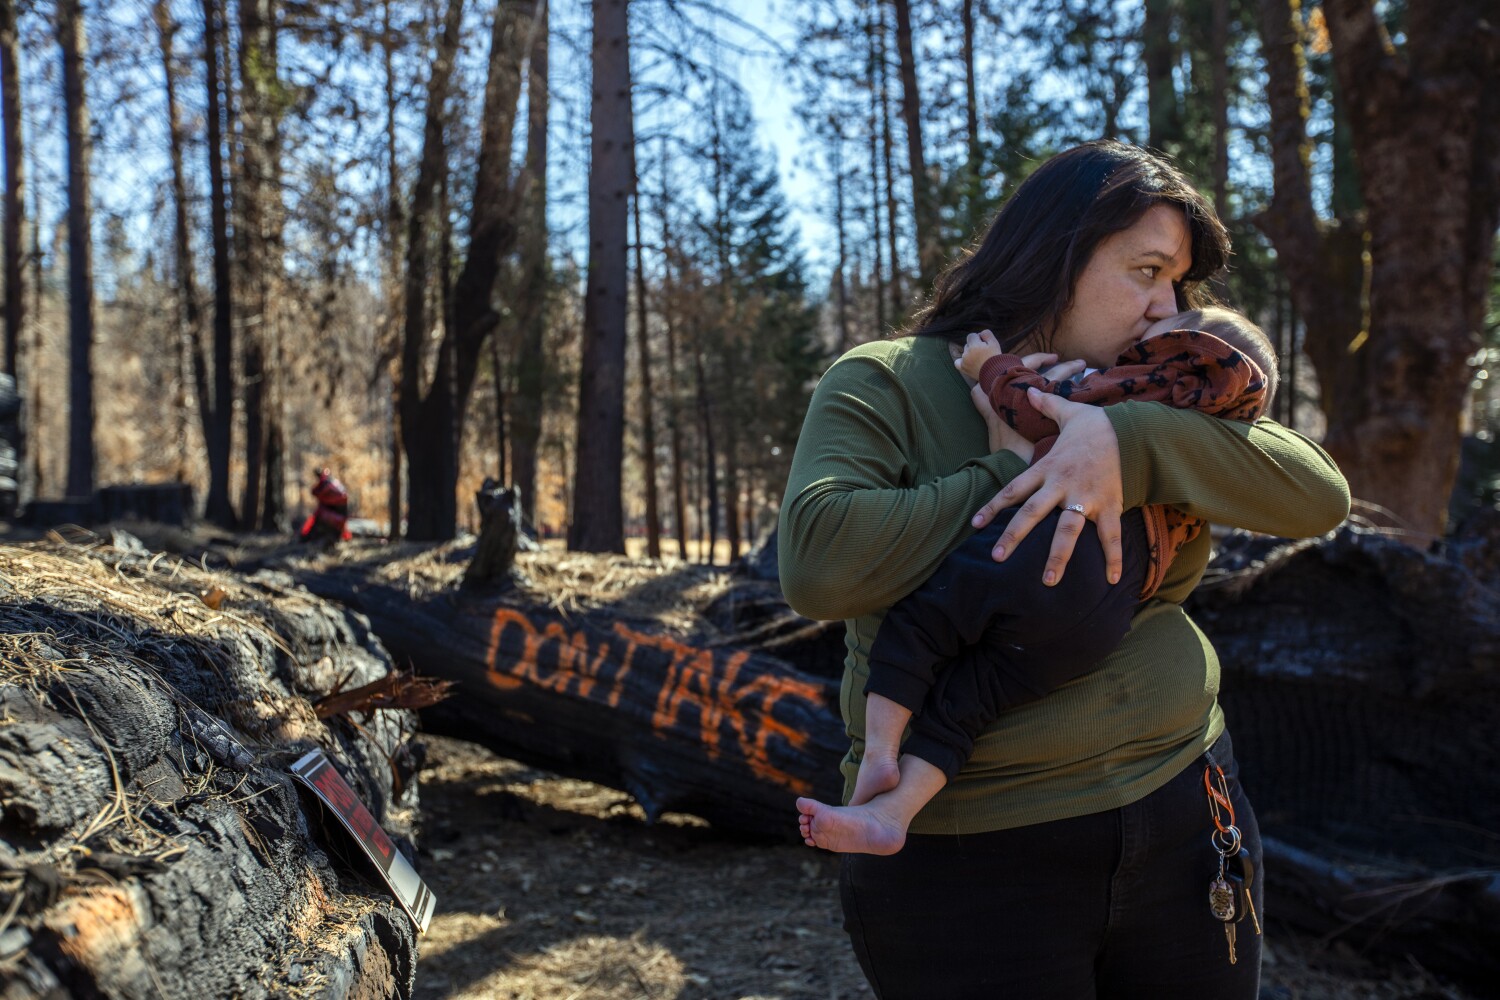 These wildfire survivors say FEMA did little to help those who lost homes